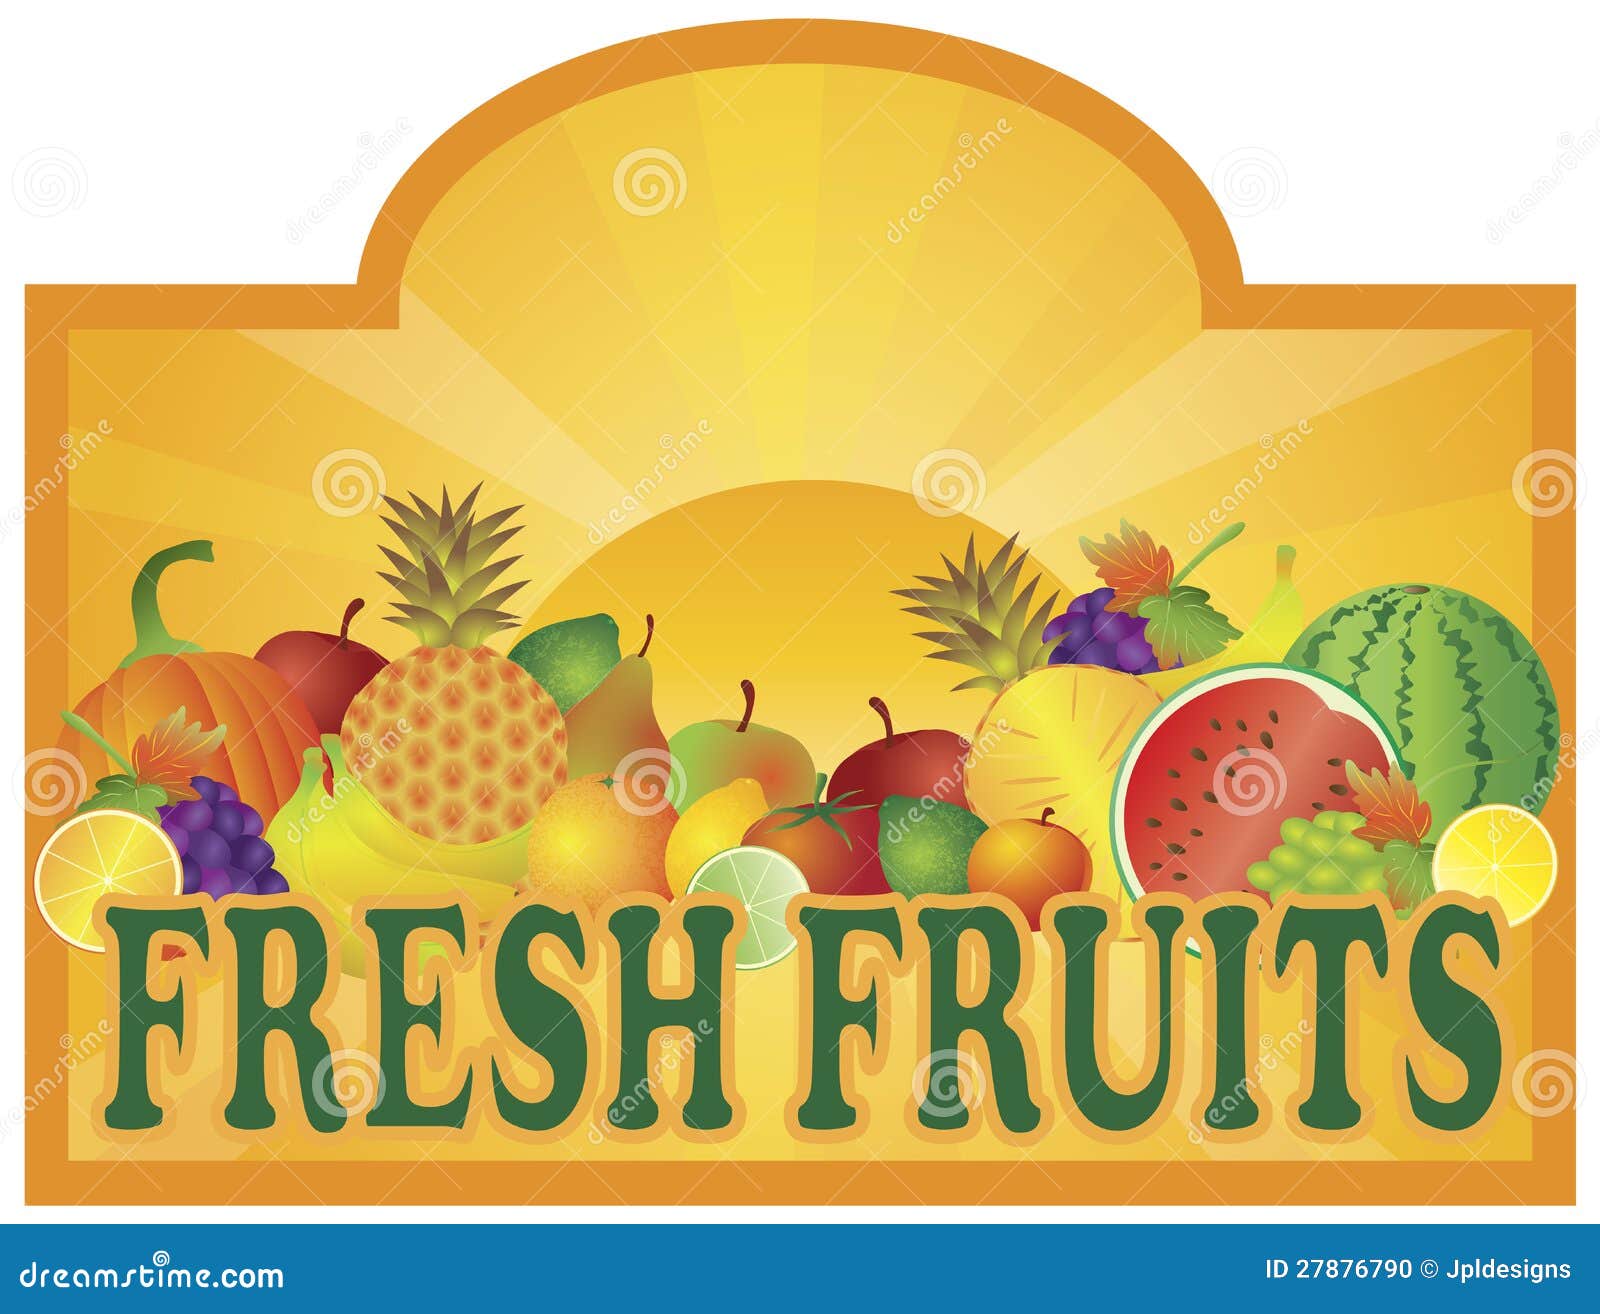 Pears Banner Fresh Fruit Wholesome Organic Green Concession Stand Sign 18x48